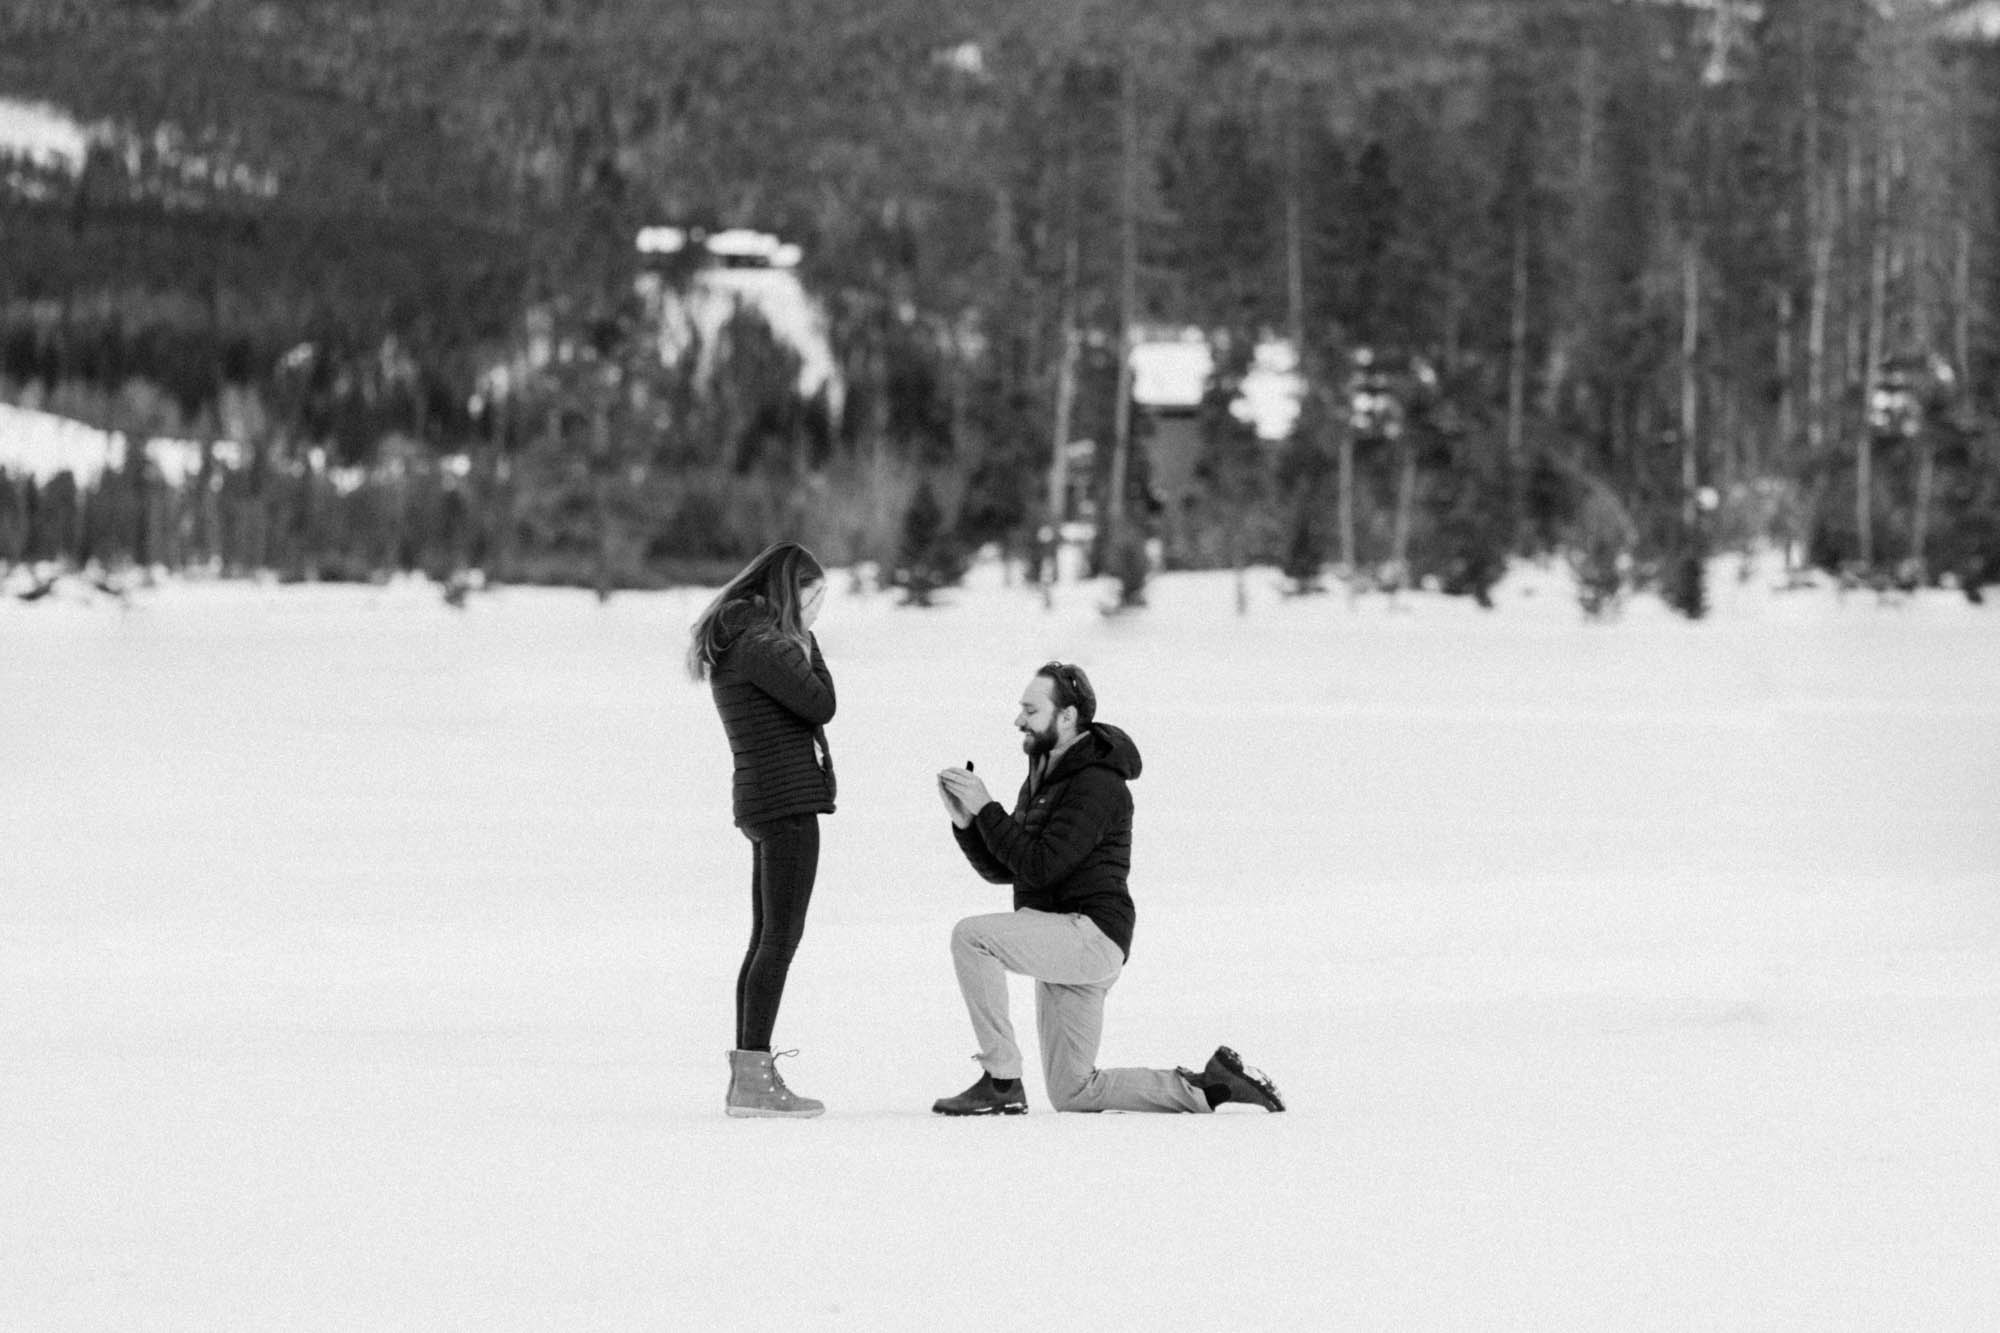 black and white photo of a man proposing to woman at devils thumb ranch on new years eve in the winter. He is down on one knee opening a ring box with a huge diamond ring on the inside asking her to marry him.